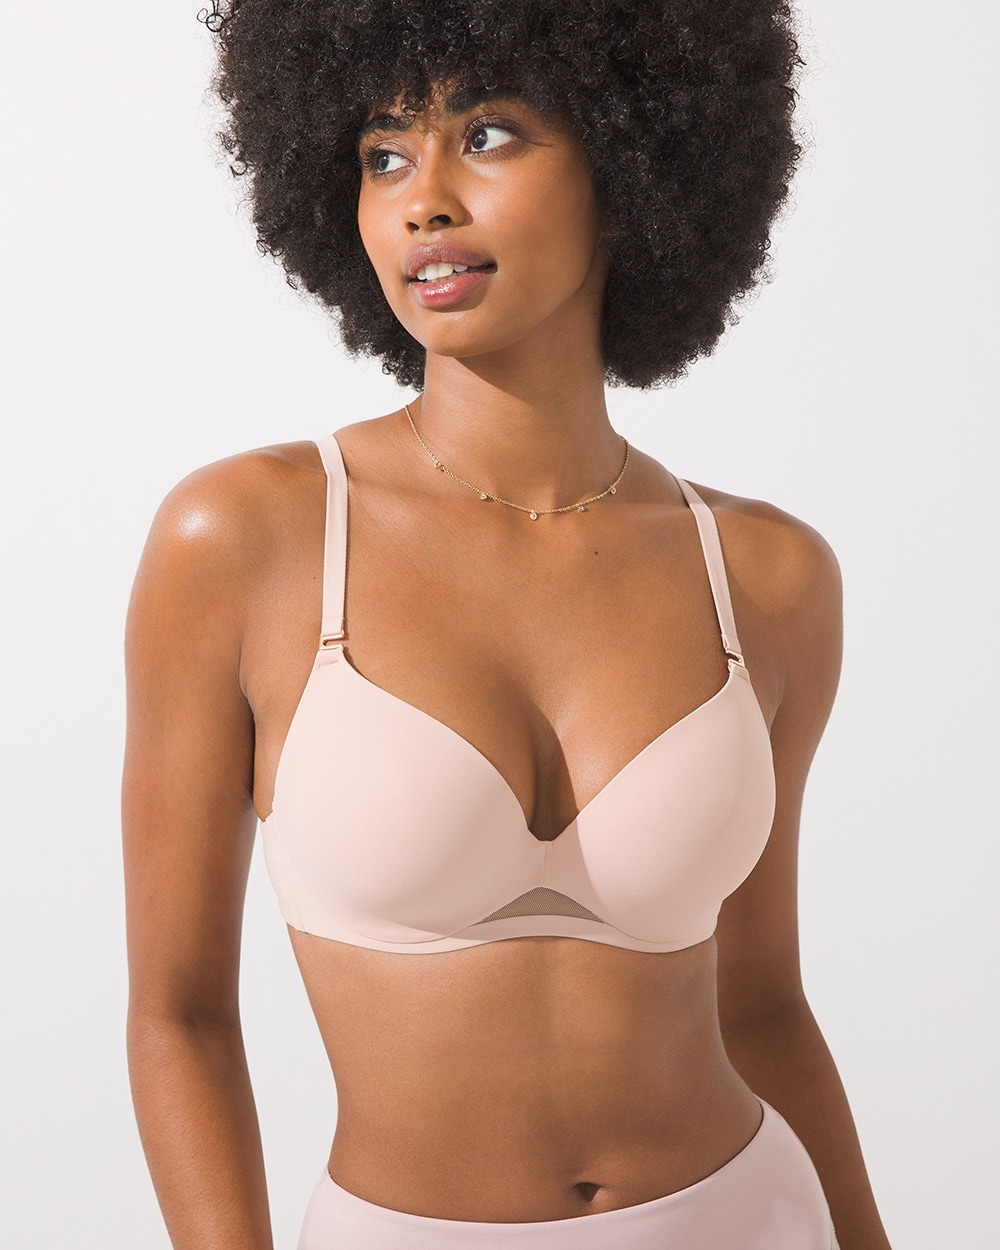 G cup bra • Compare (77 products) see the best price »